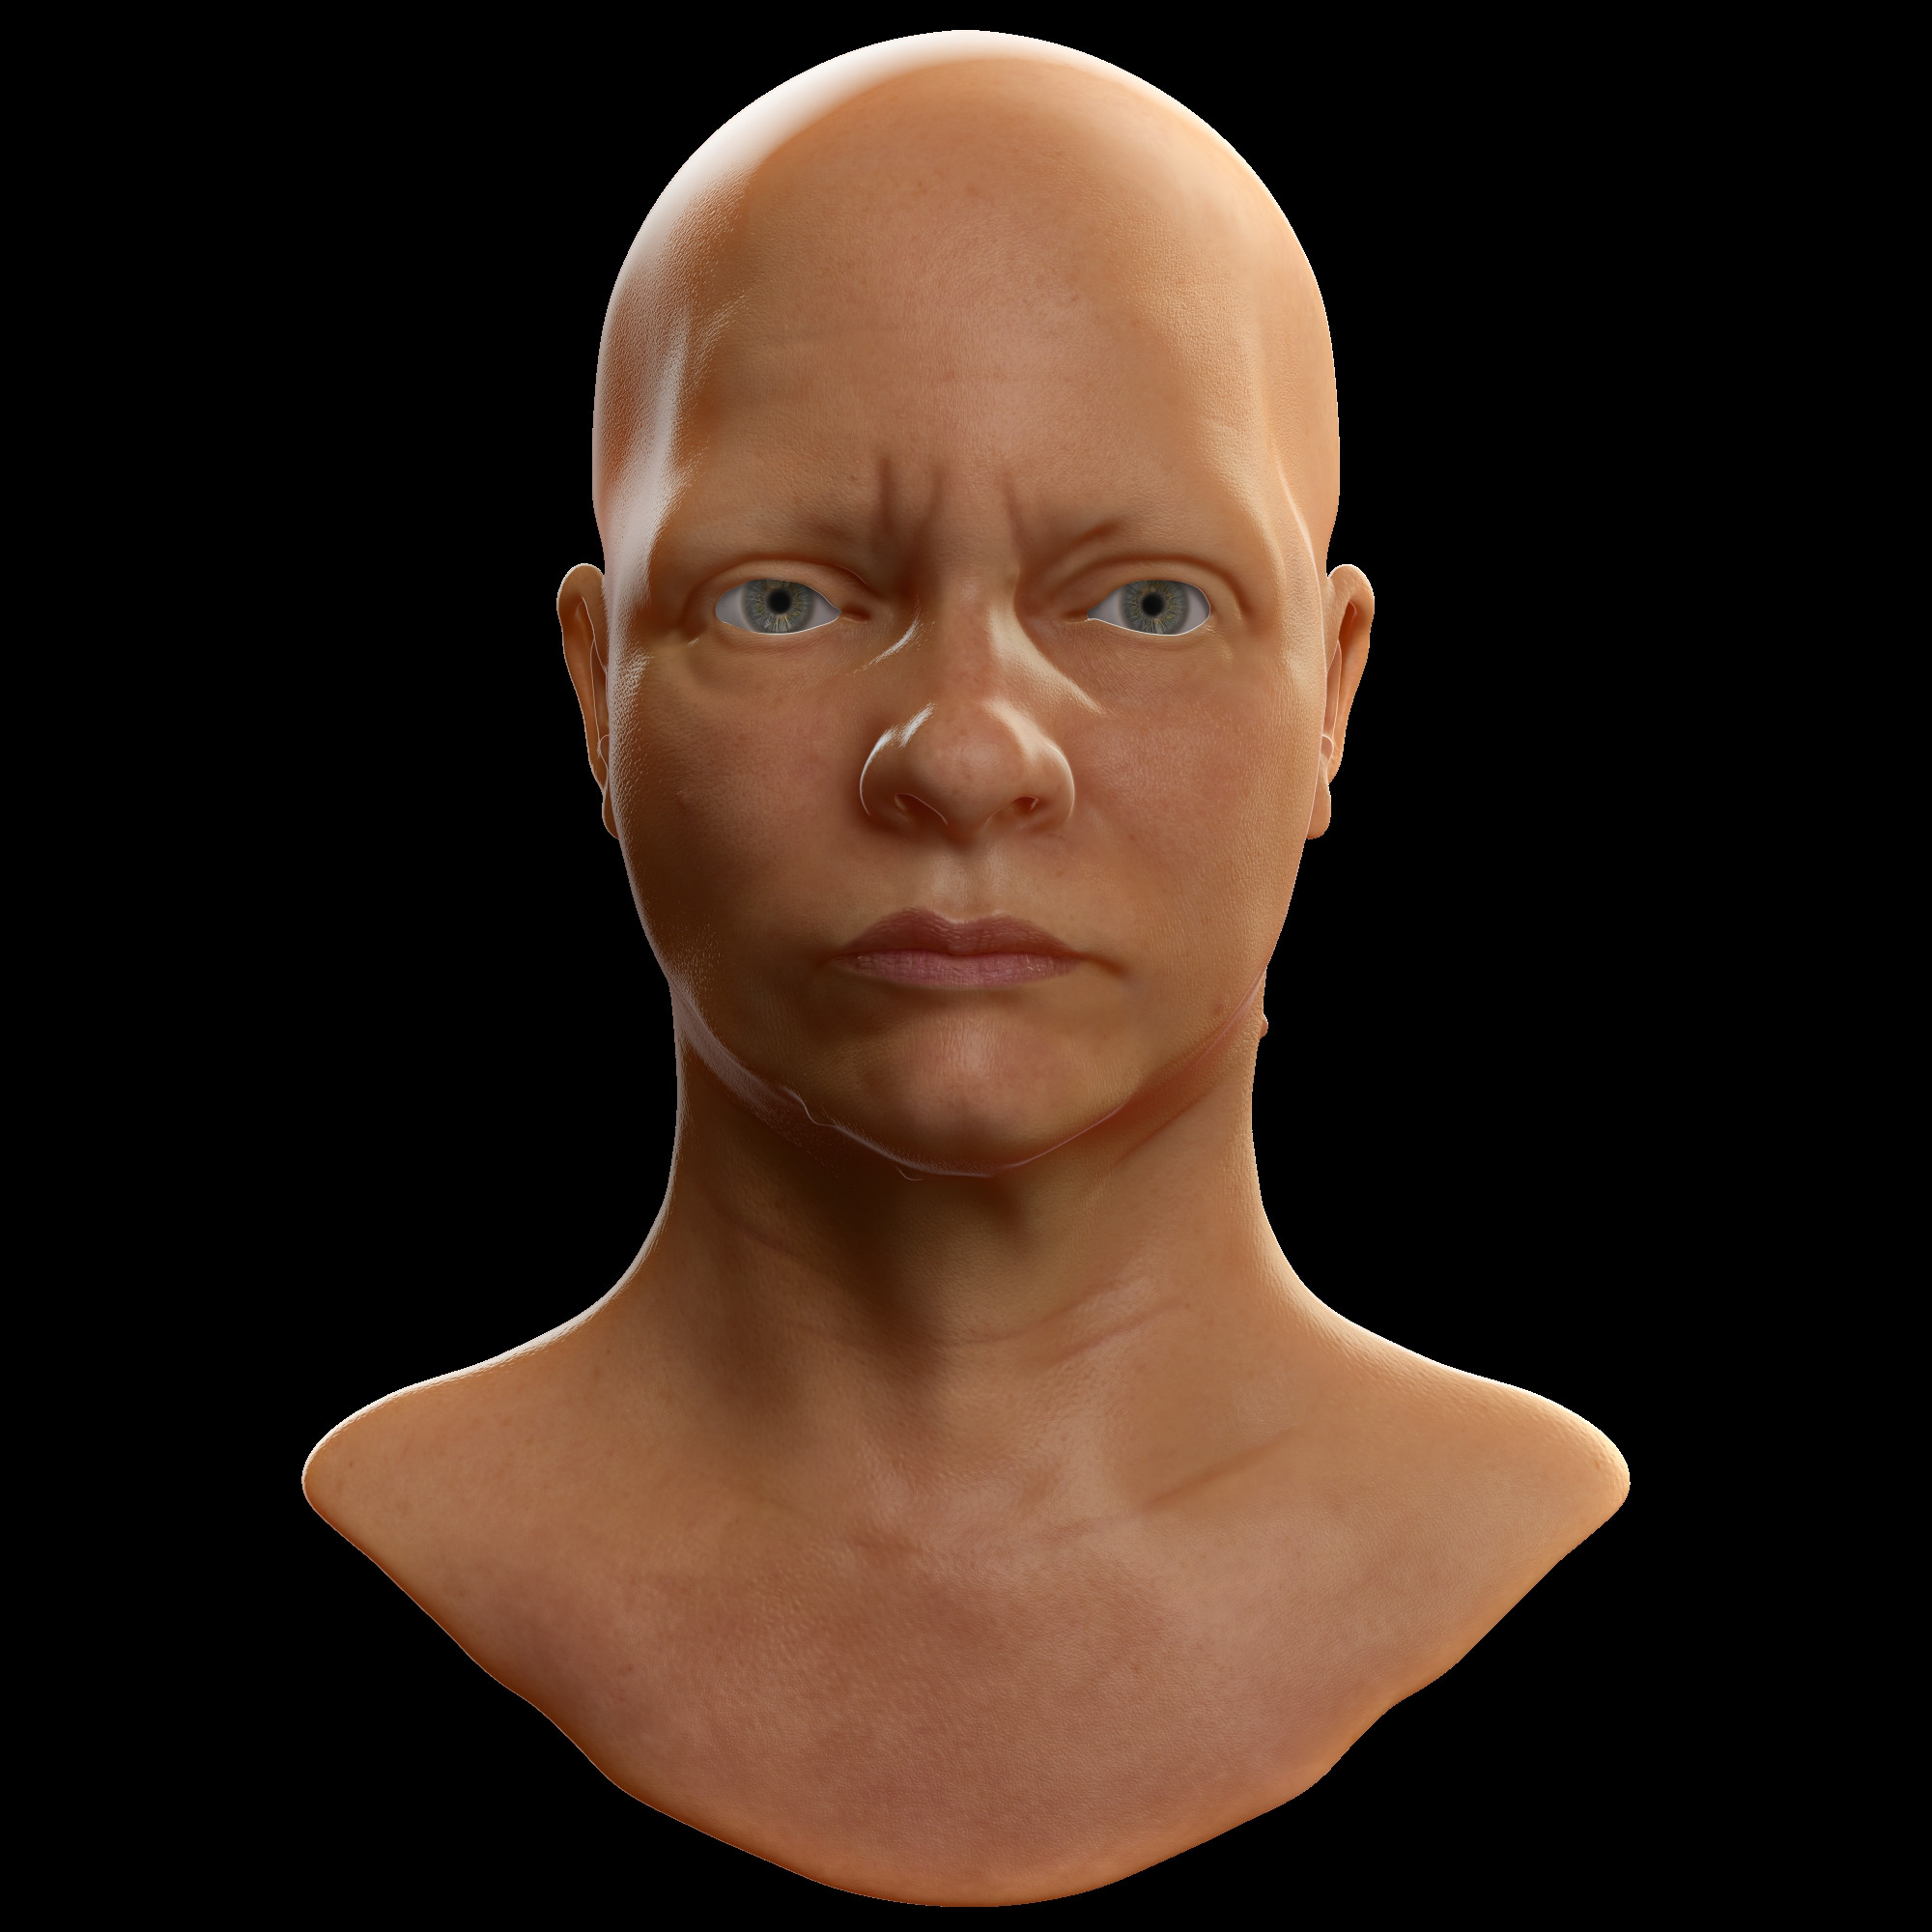 Added the right material for eyes and sclera and adjusted the lighting. 